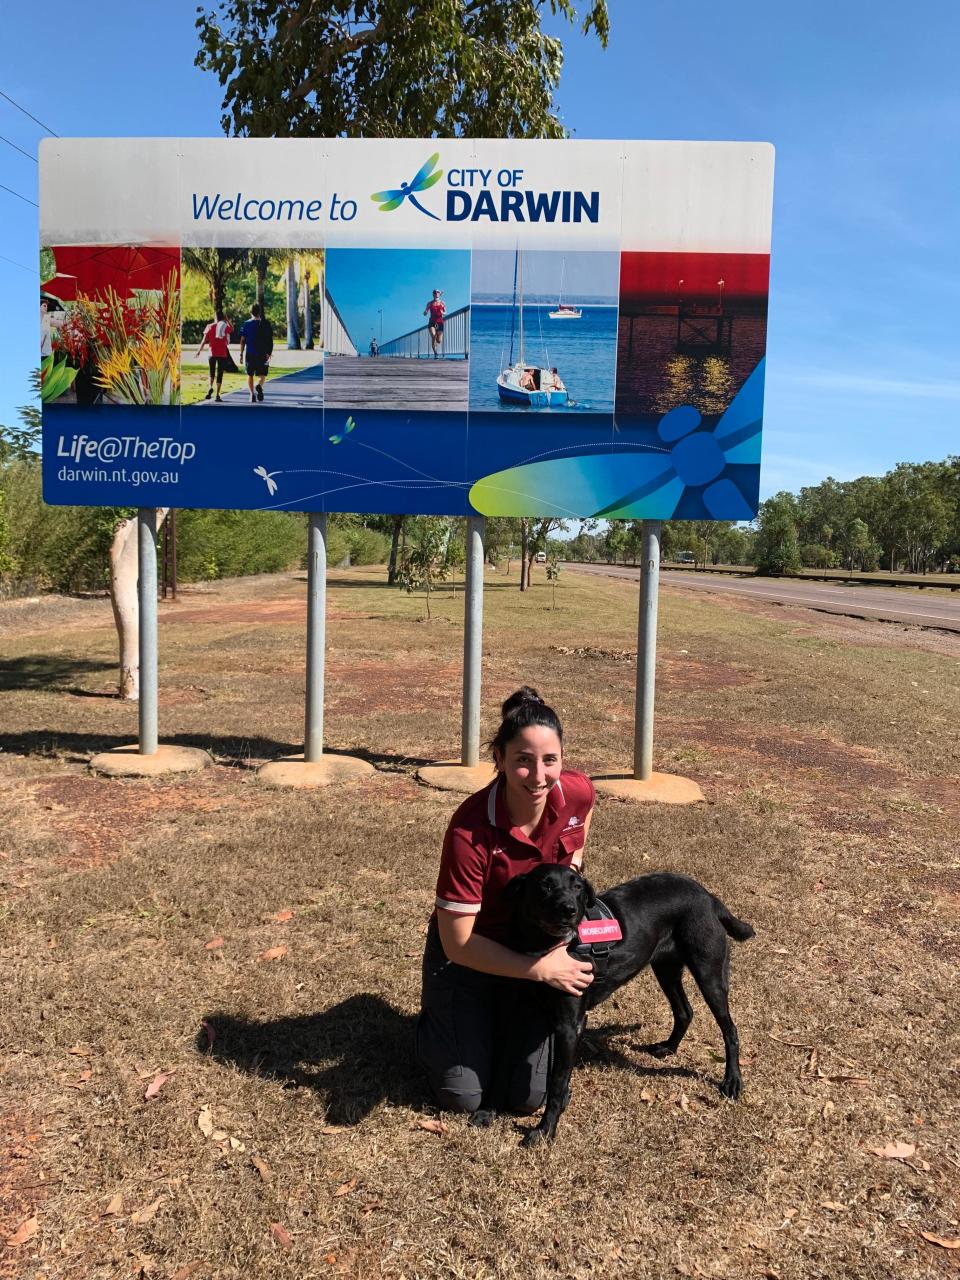 A passenger traveling from Bali, Indonesia to Australia was fined $1,874 after airport dog Zinta responded to a passenger’s backpack and found two undeclared egg and beef sausage McMuffins and a ham croissant were found in their luggage on arriving at Darwin Airport.